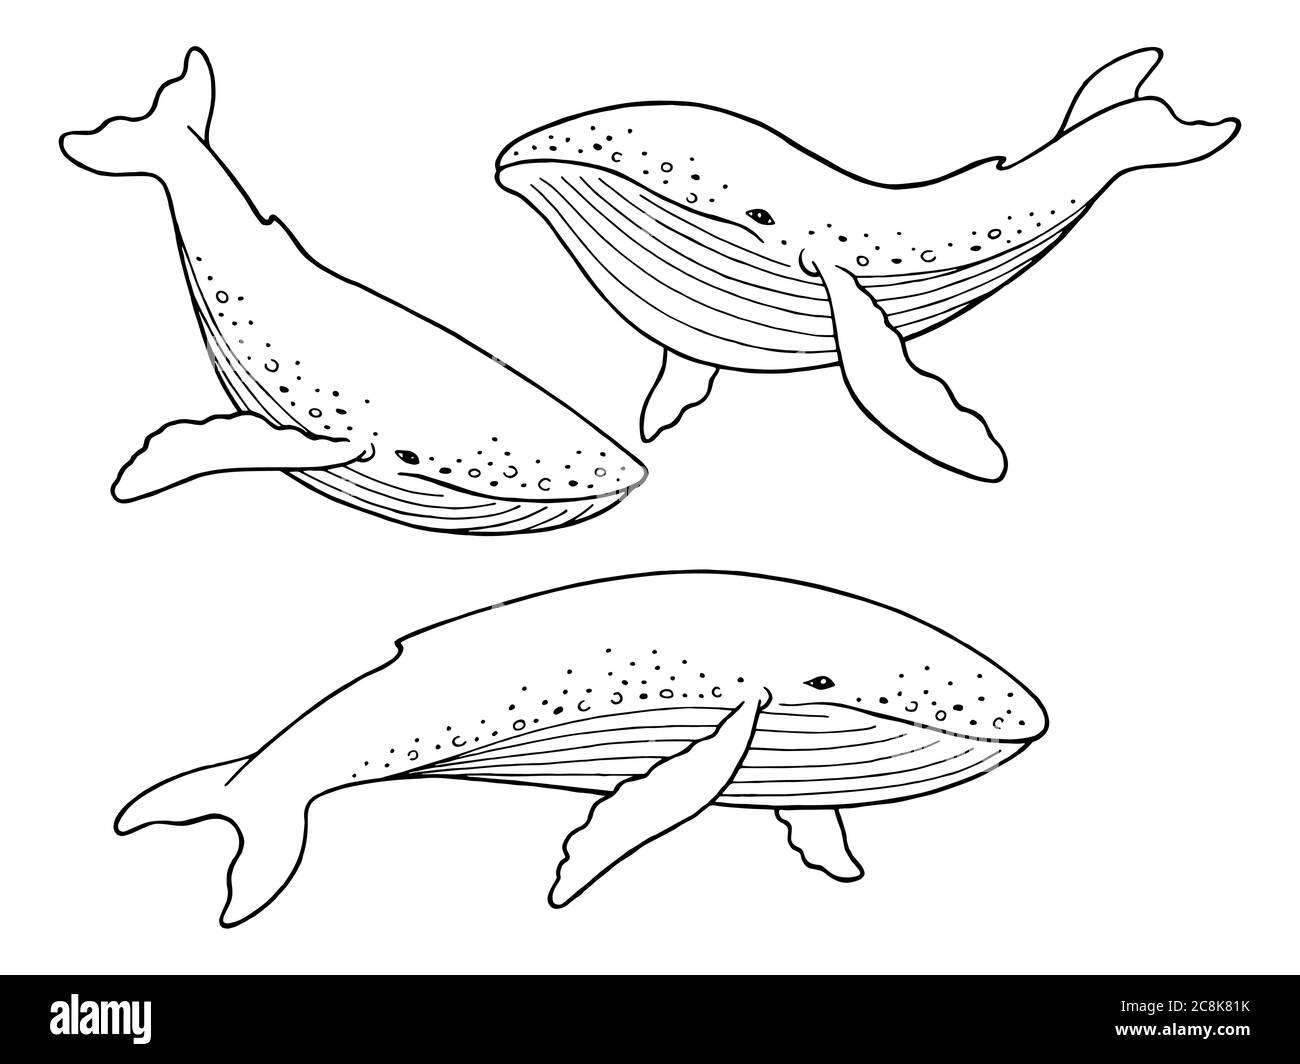 Blue whale graphic set black white isolated sketch illustration vector Stock Vector